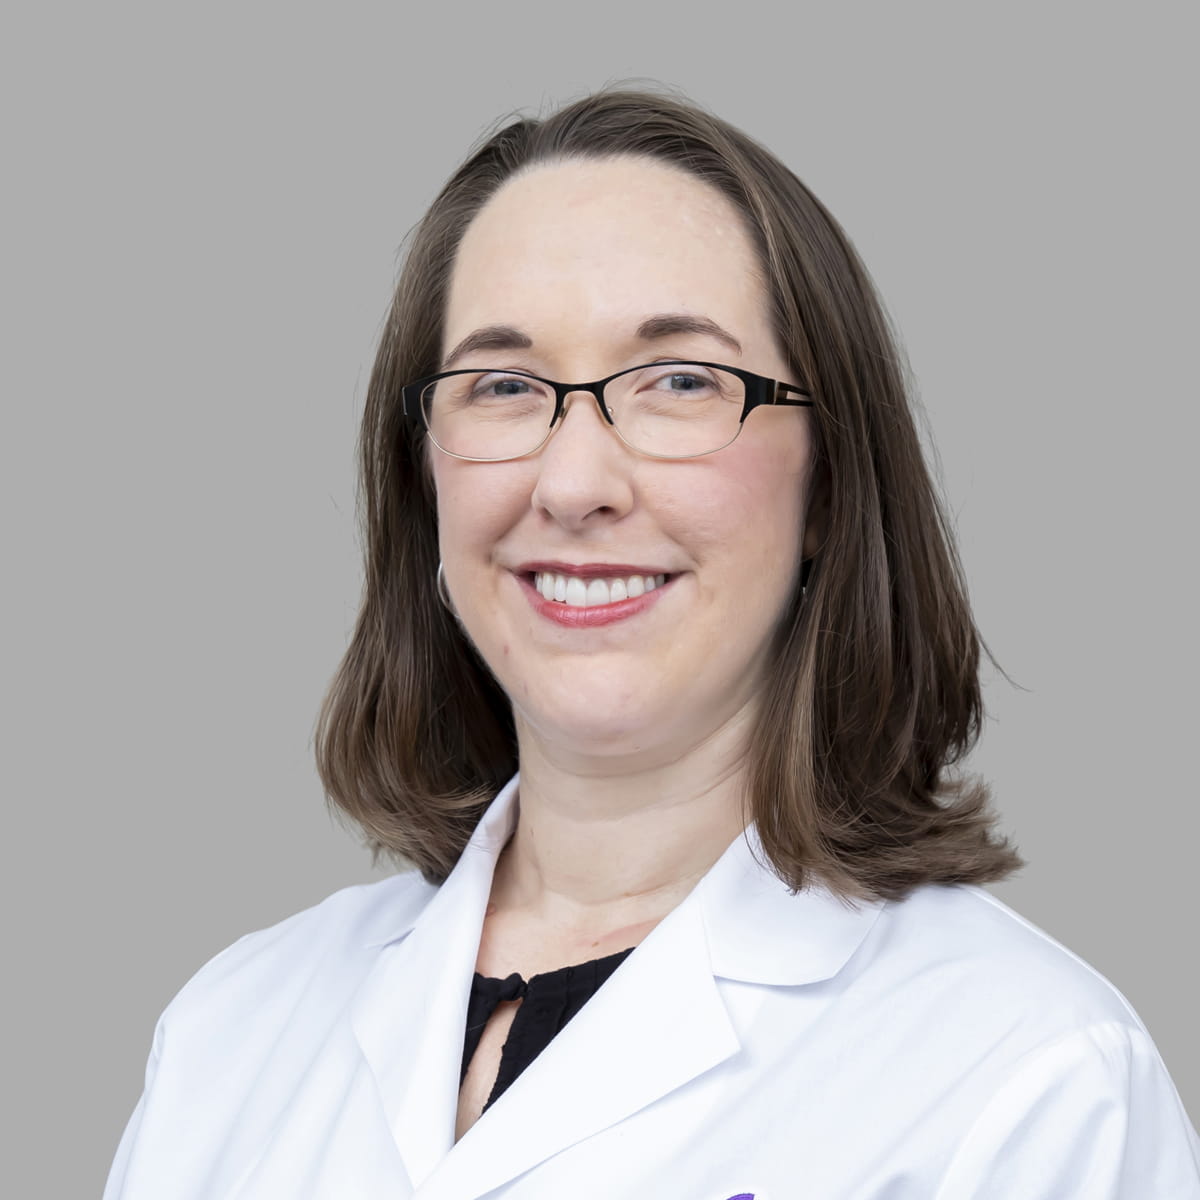 A friendly image of Sarah Yount, MD